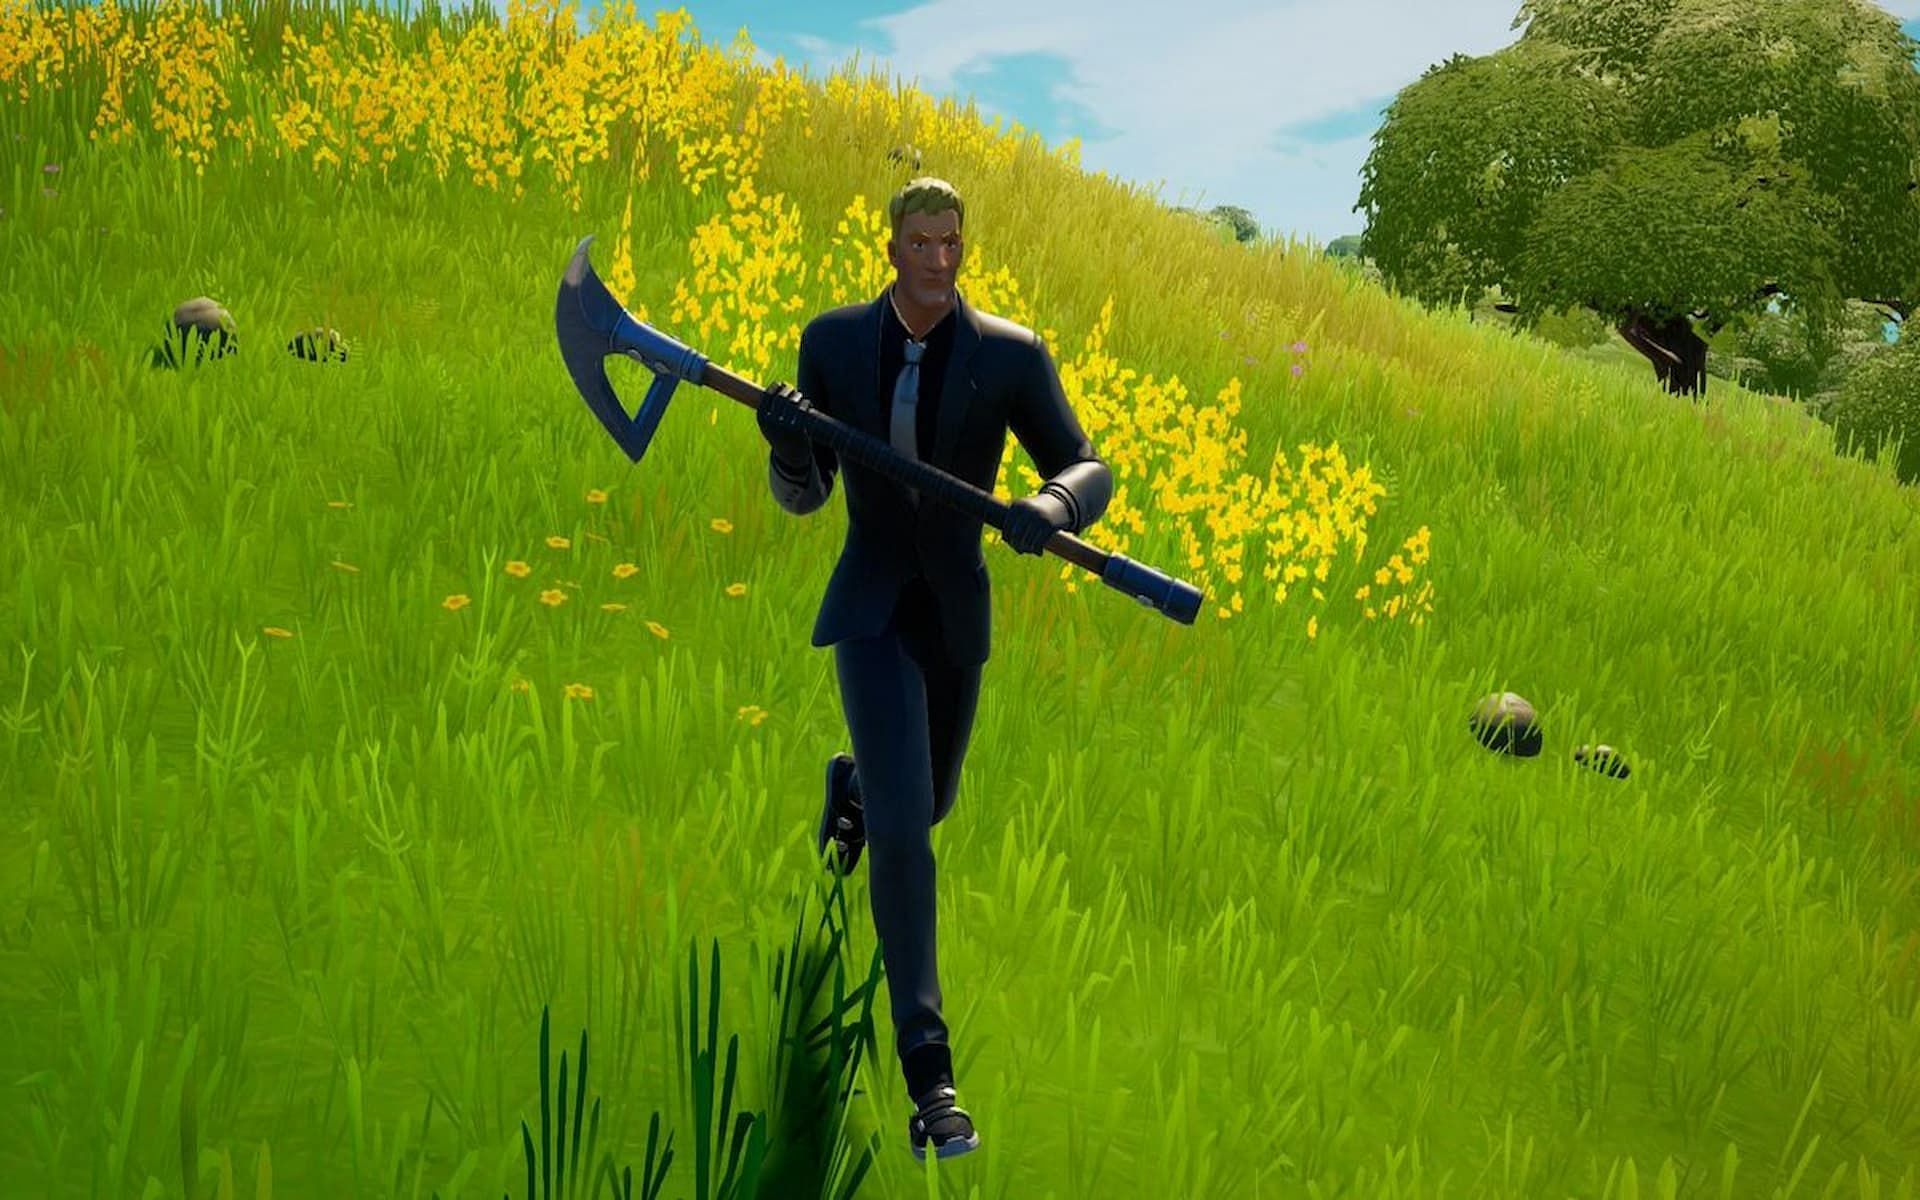 Bodyguards may be taken from a past LTM and added to the regular mode (Image via Epic Games)